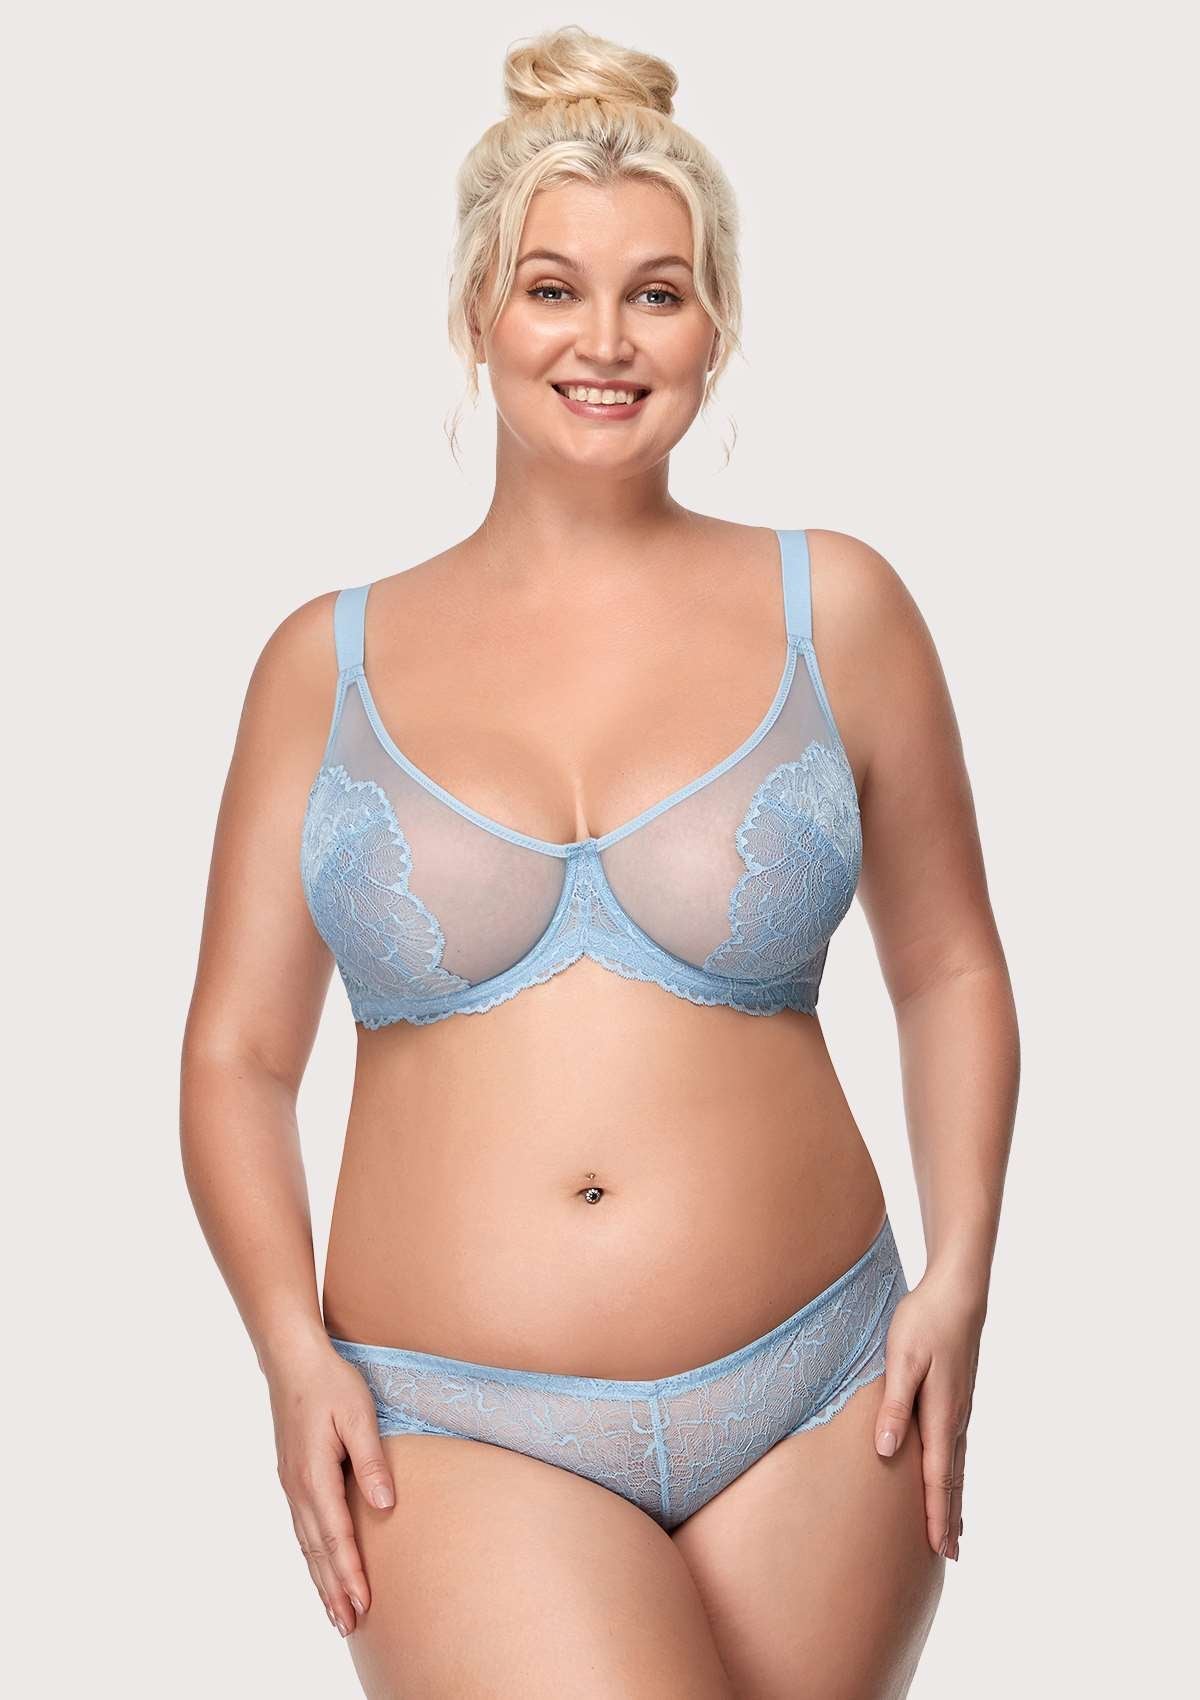 HSIA Blossom Full Coverage Supportive Unlined Underwire Bra Set - Storm Blue / 38 / DDD/F